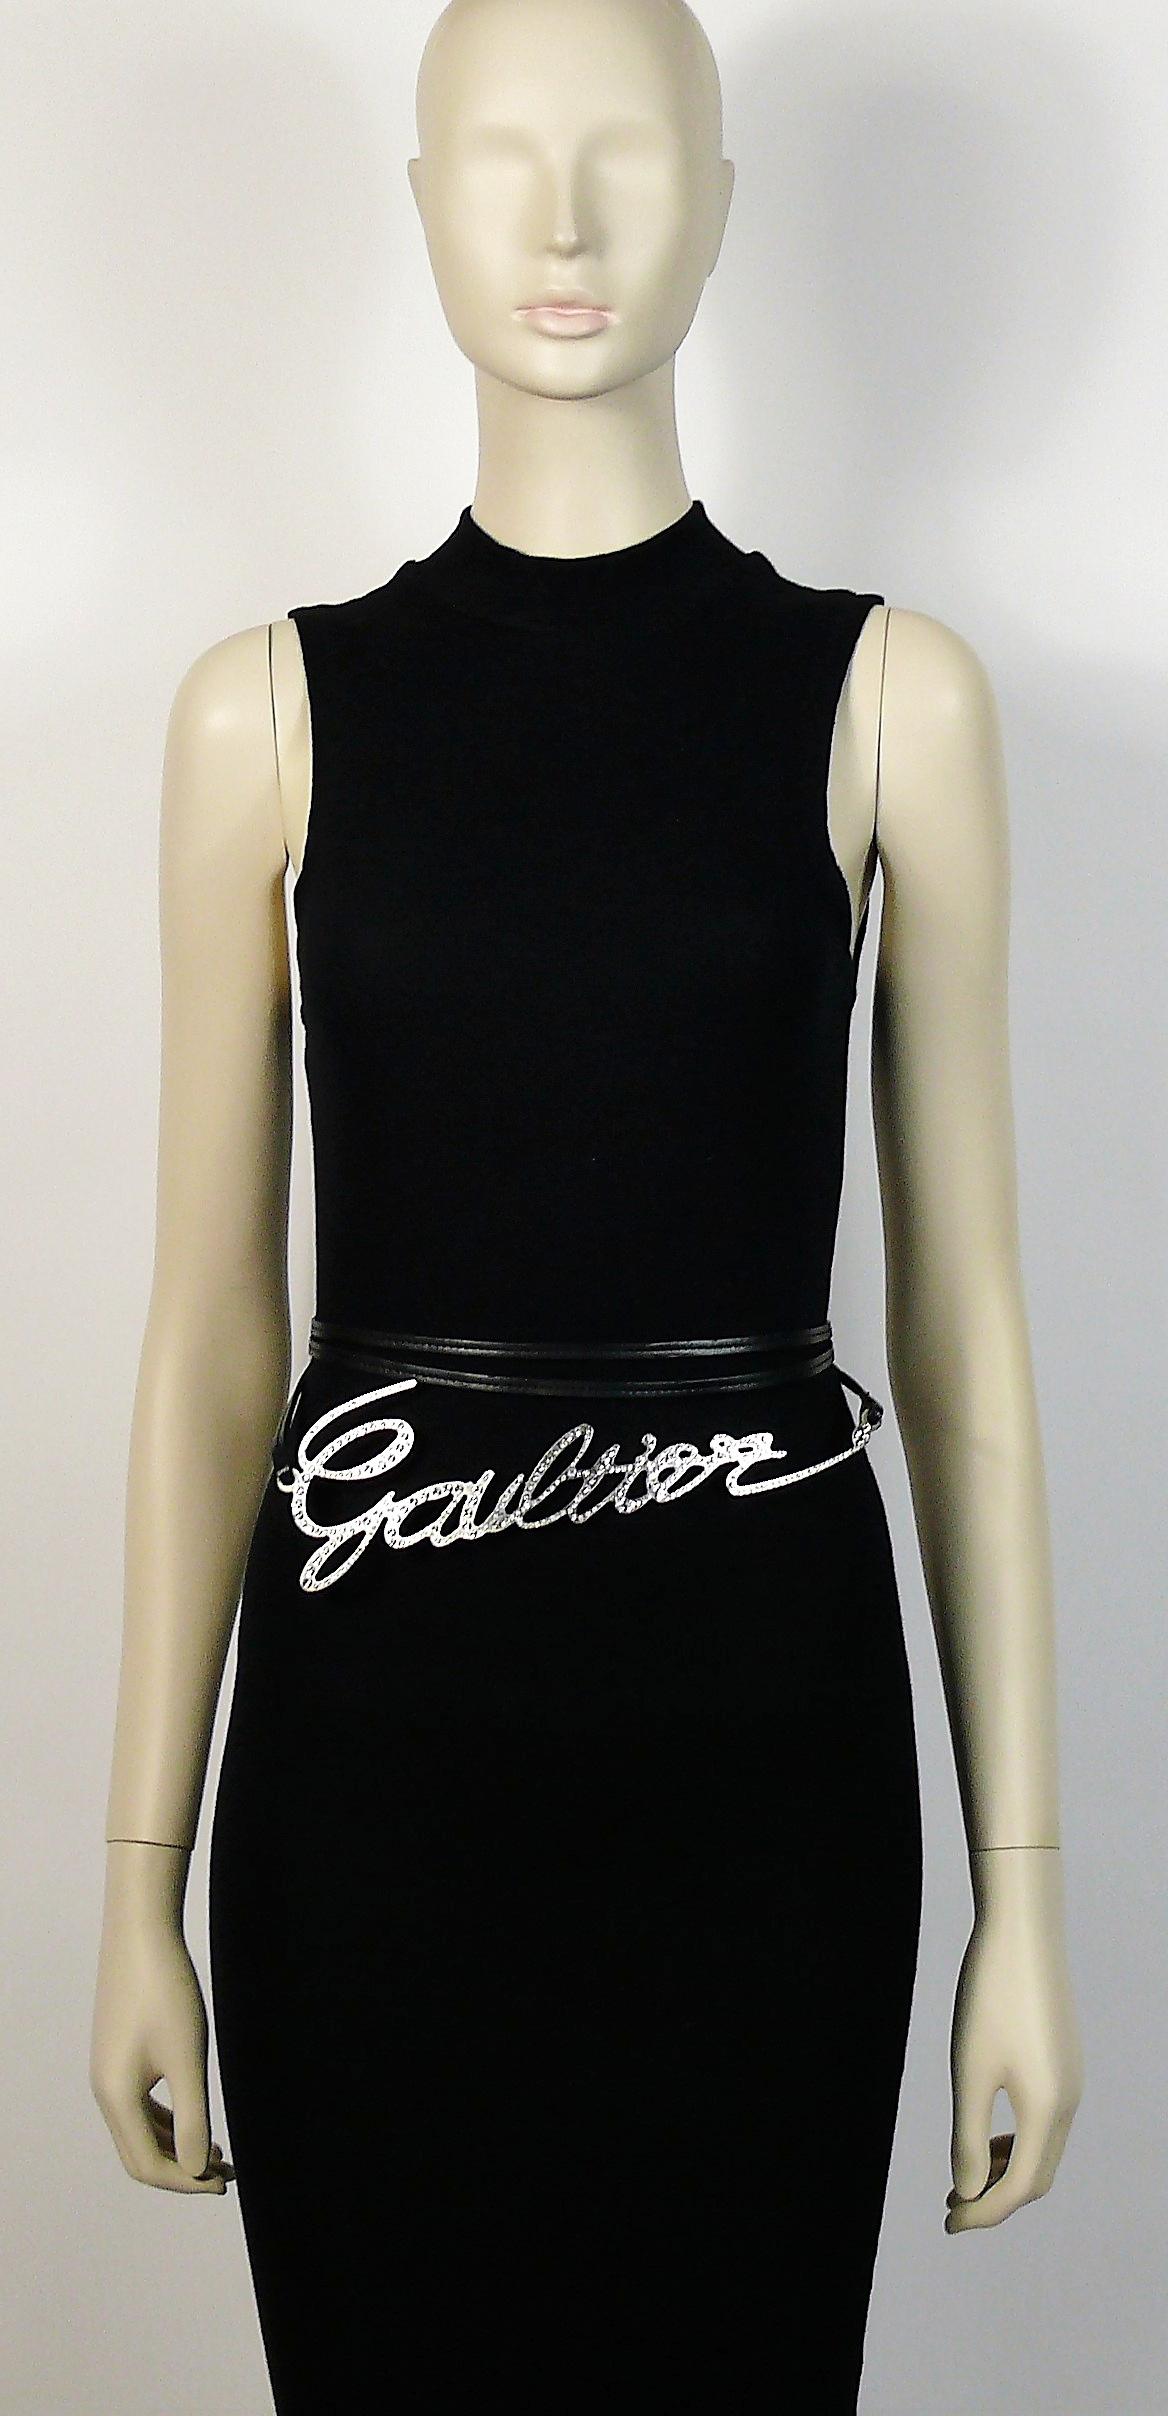 JEAN PAUL GAULTIER cursive logo metal chrome belt featuring clear crystal embellishement and black leather cords that tie in the back.

One size fits all.
Can be worn in several ways.

Indicative measurements : total length approx. 300 cm (118.11